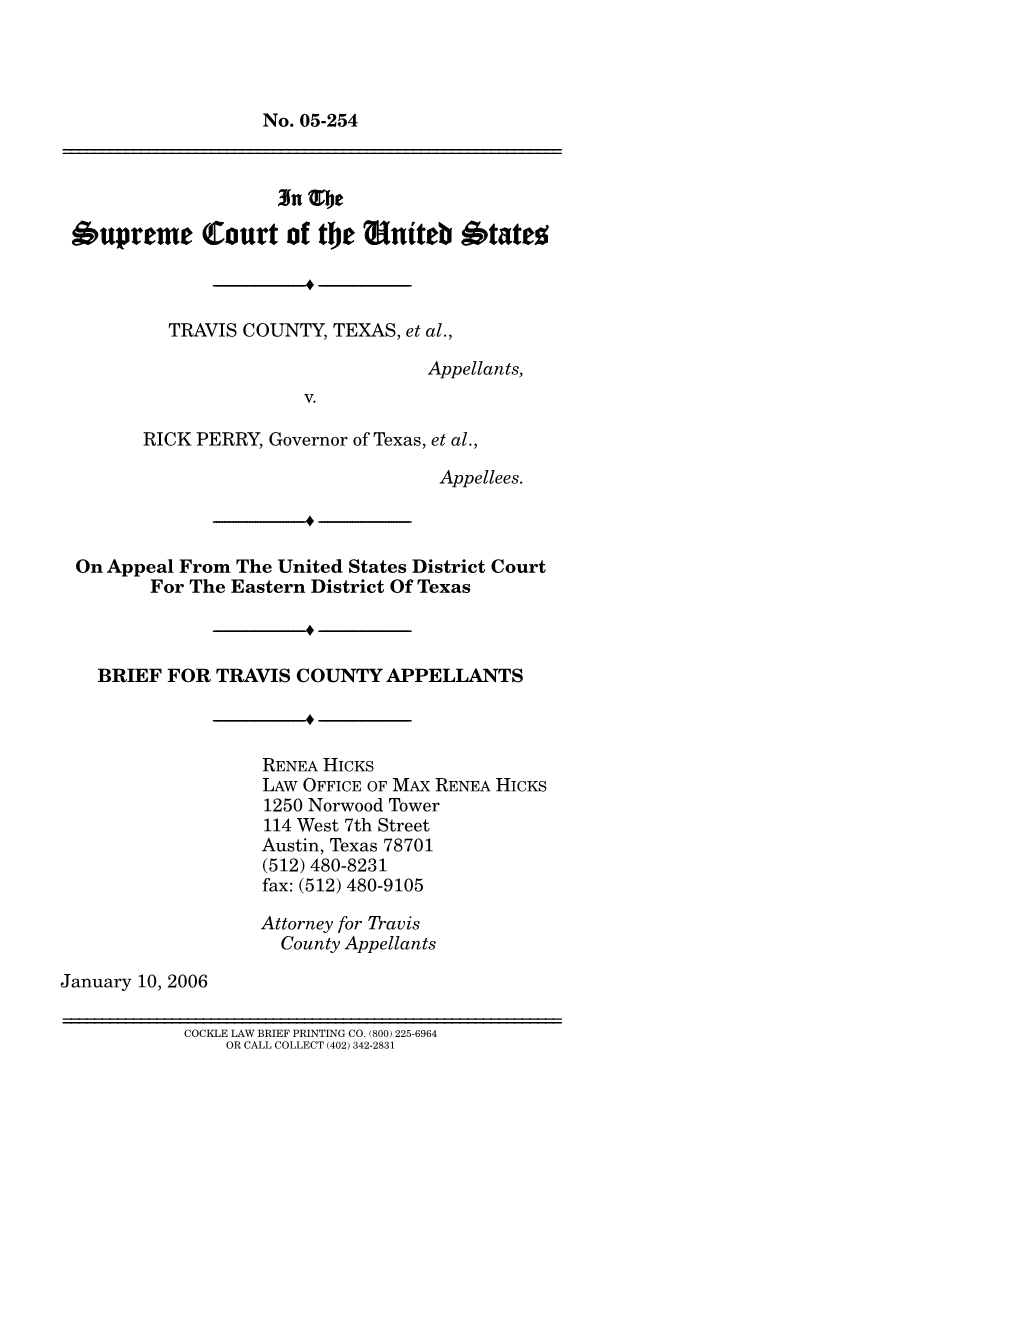 Brief for Appellants in Travis County V. Perry, 05-254